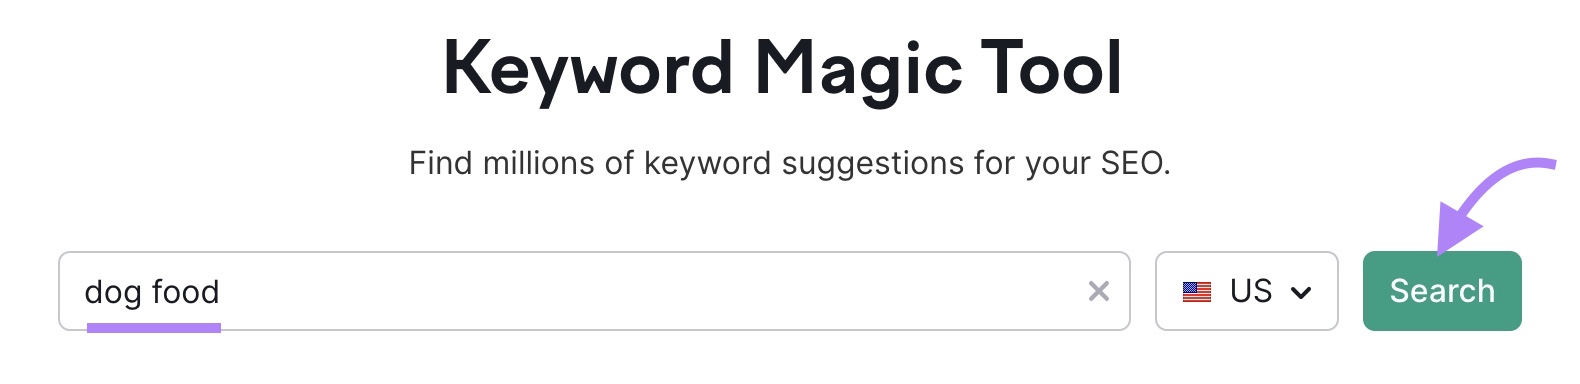 Keyword magic tool search bar with the term ' food' entered.